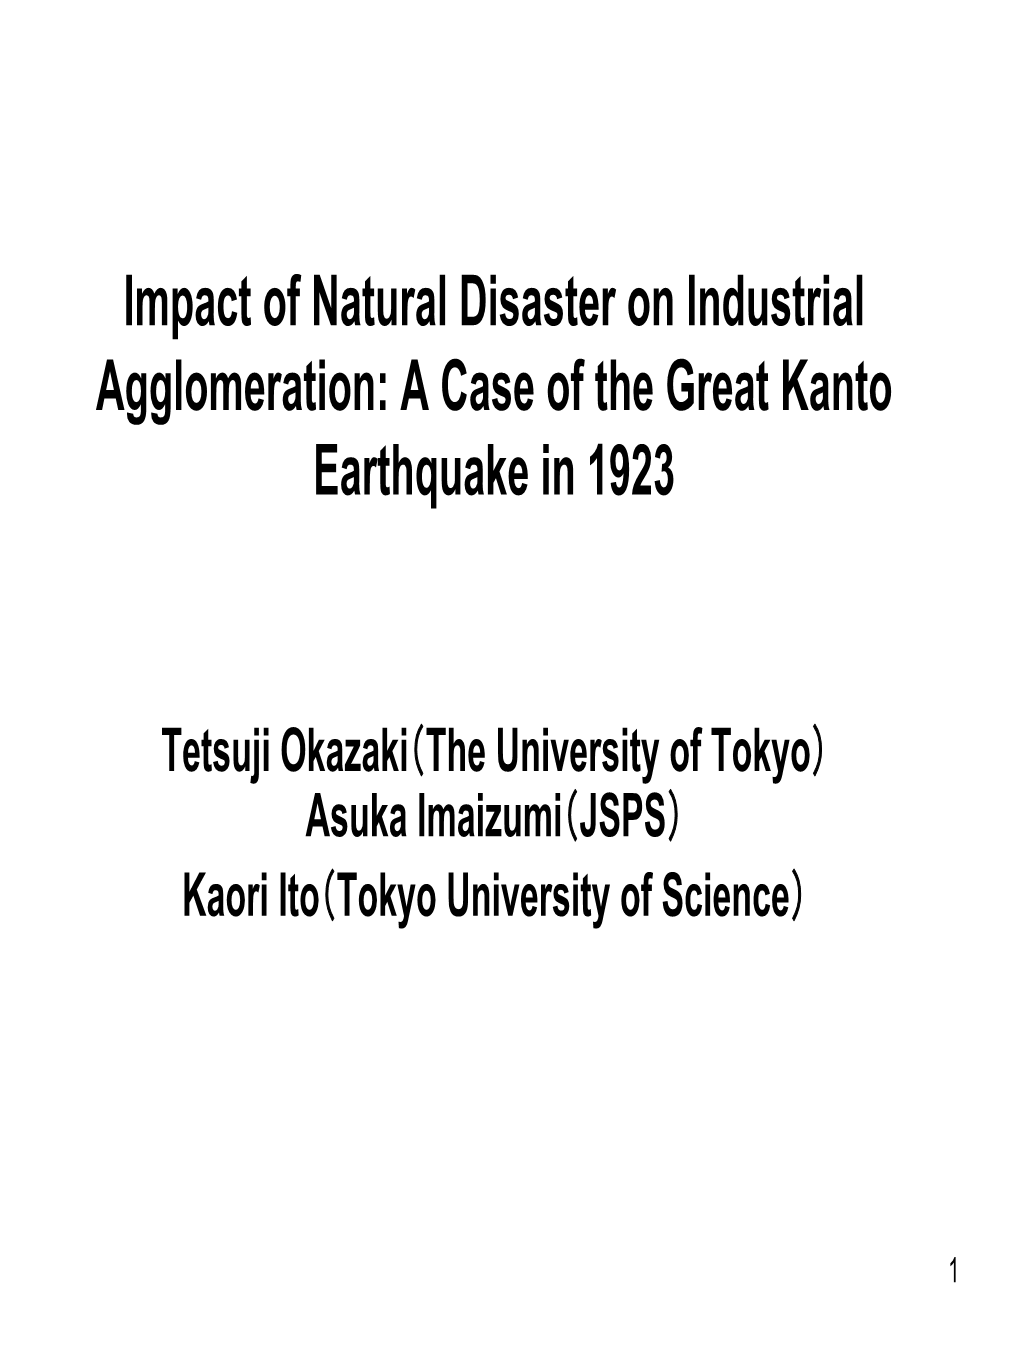 Impact of Natural Disaster on Industrial Agglomeration: a Case of the Great Kanto Earthquake in 1923